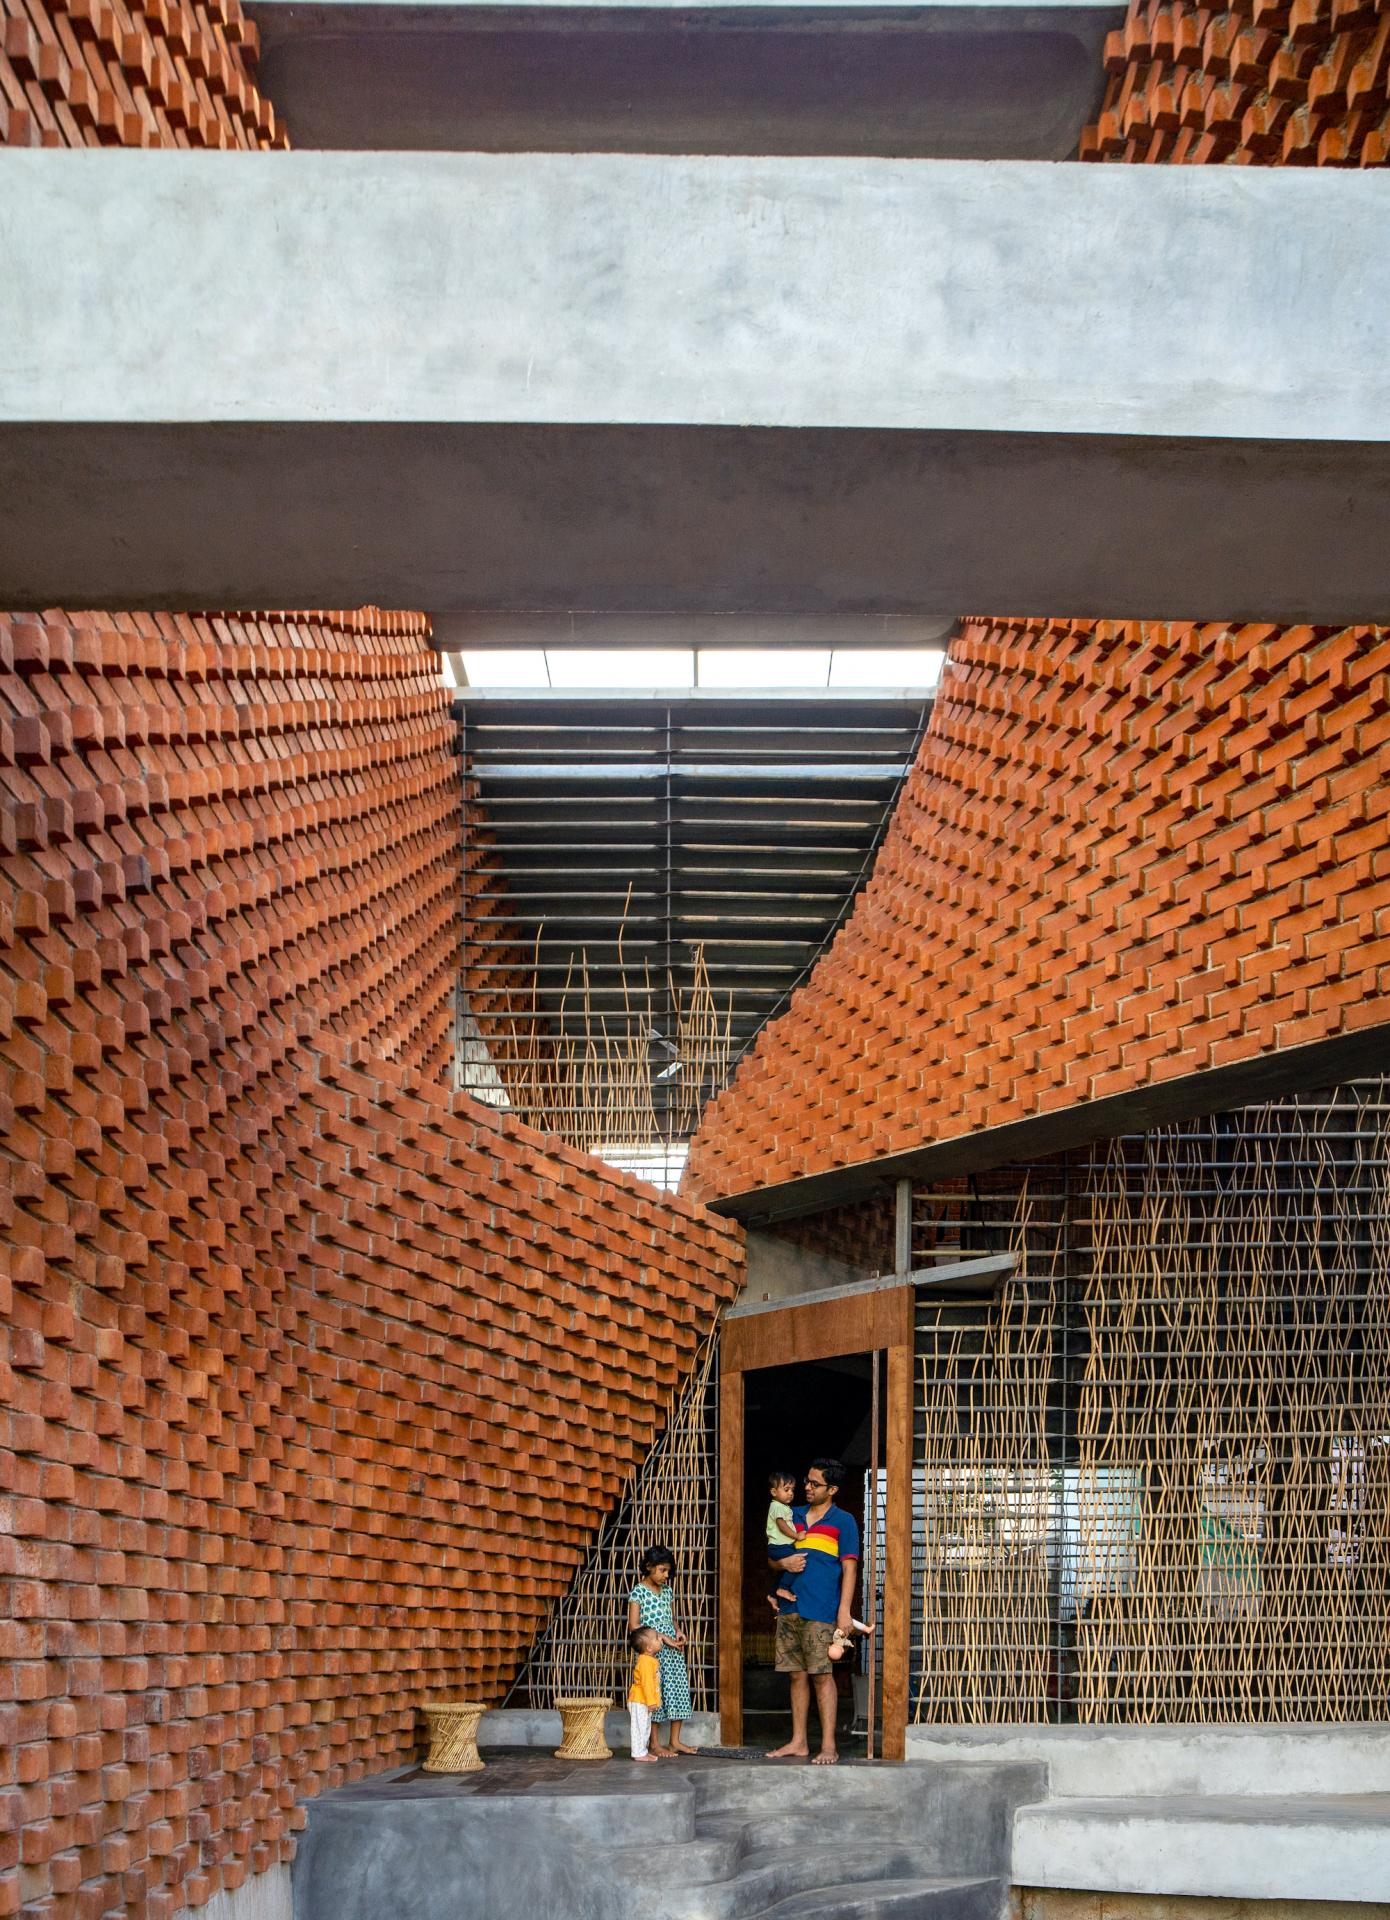 Step Into A Home In India Composed Of Pirouetting Fired Brick Walls